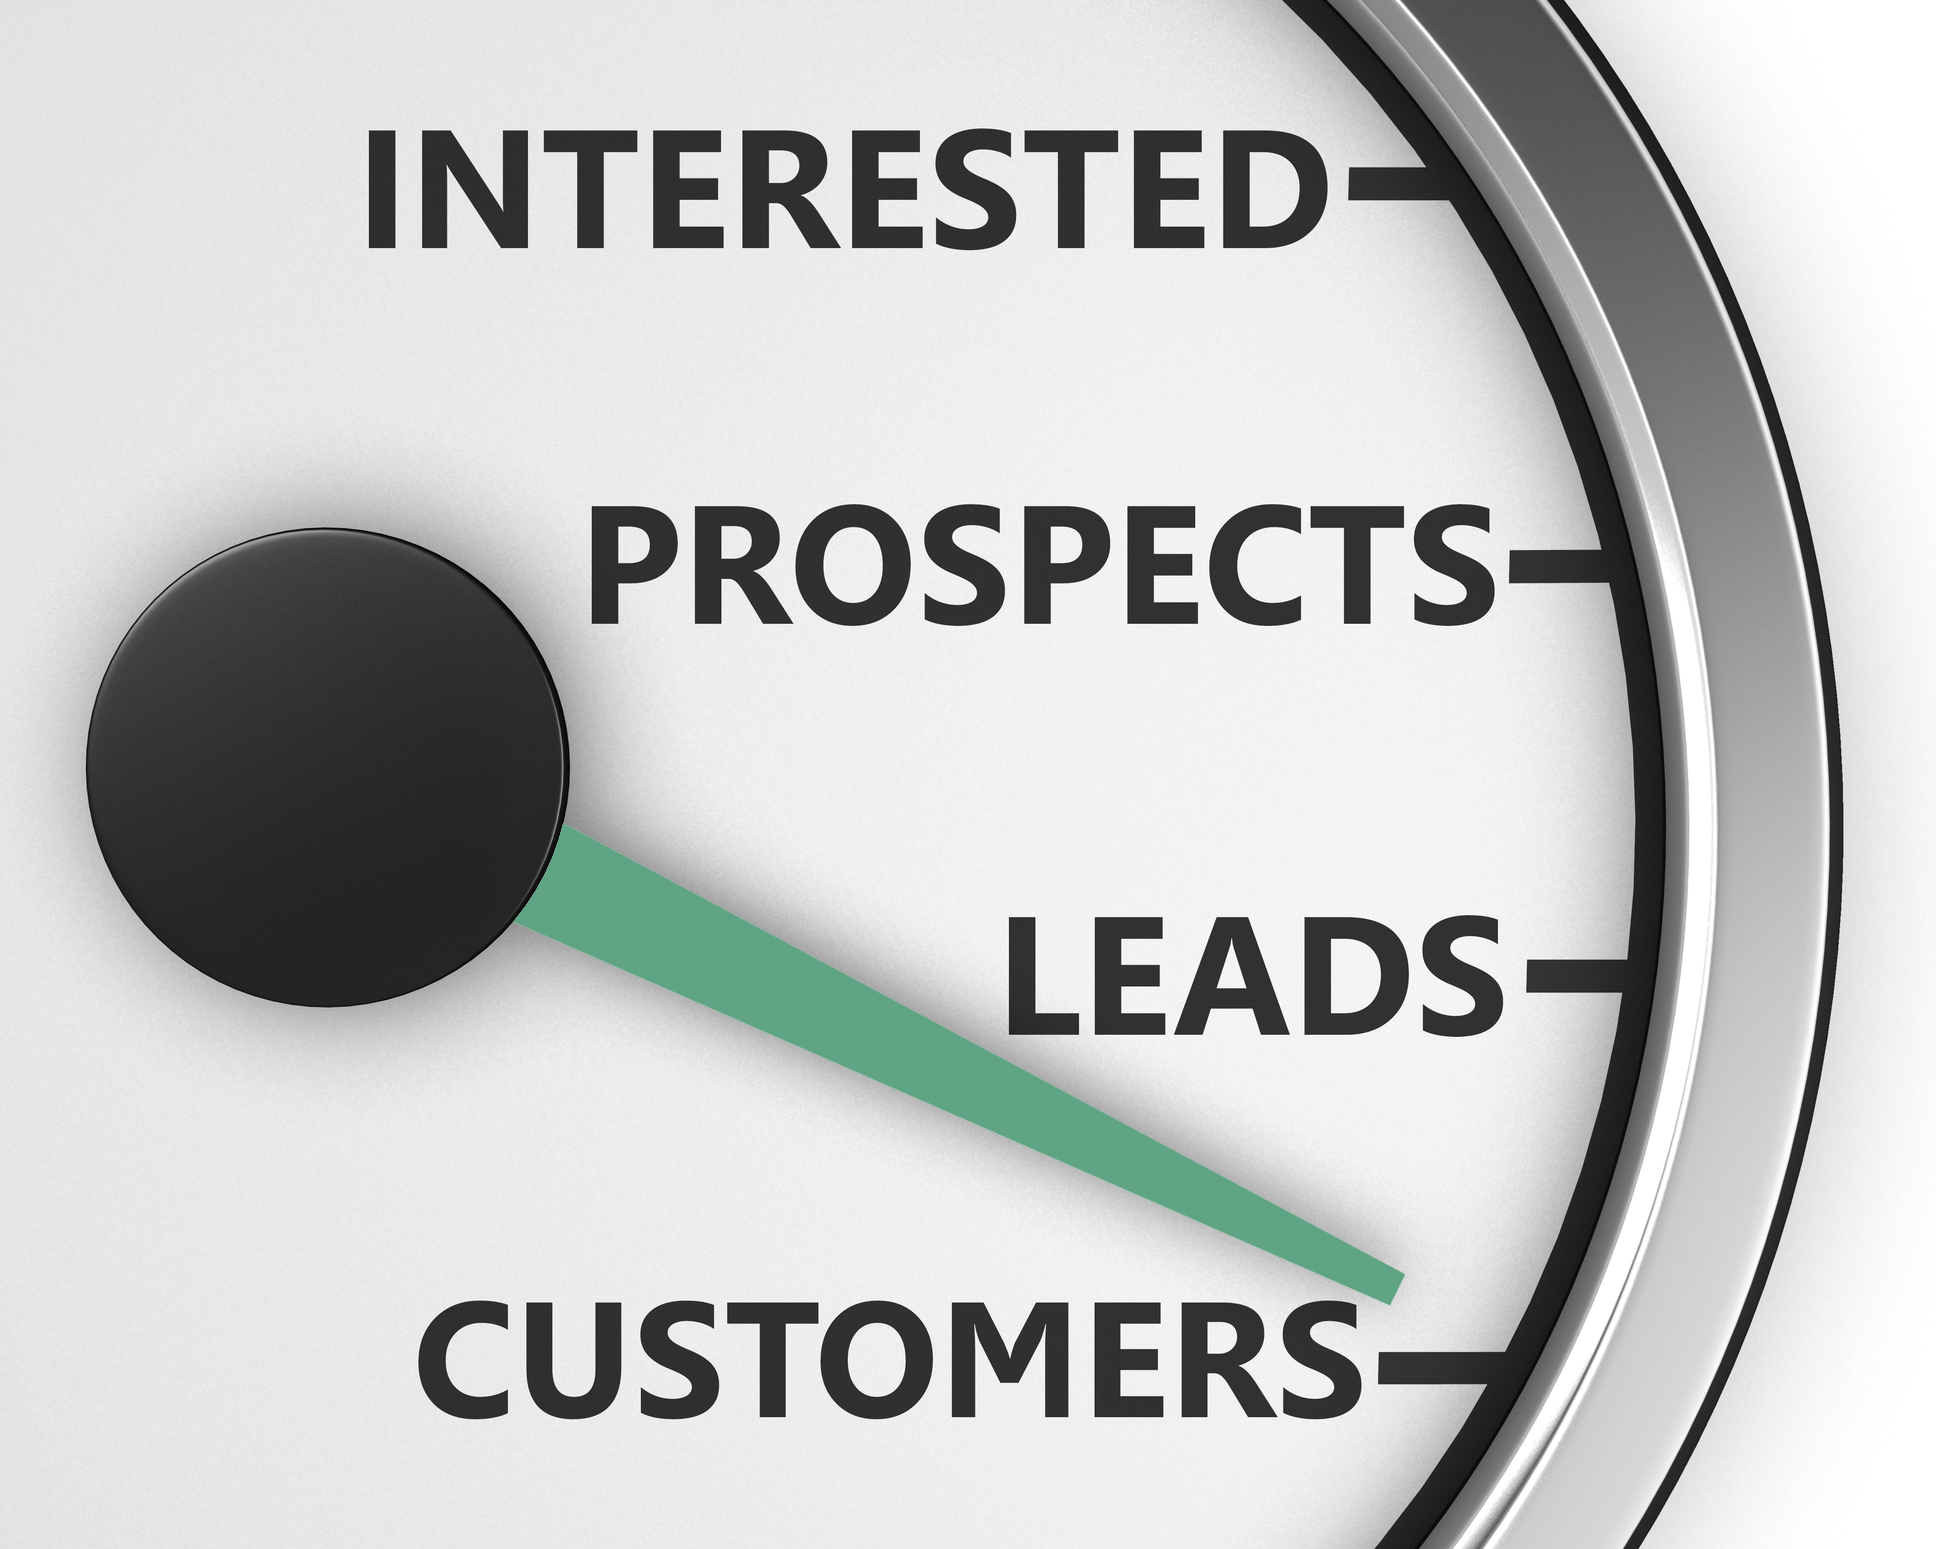 Follow These 6 Steps to NAIL Your Sales Lead Generation - Elaine Ball Ltd